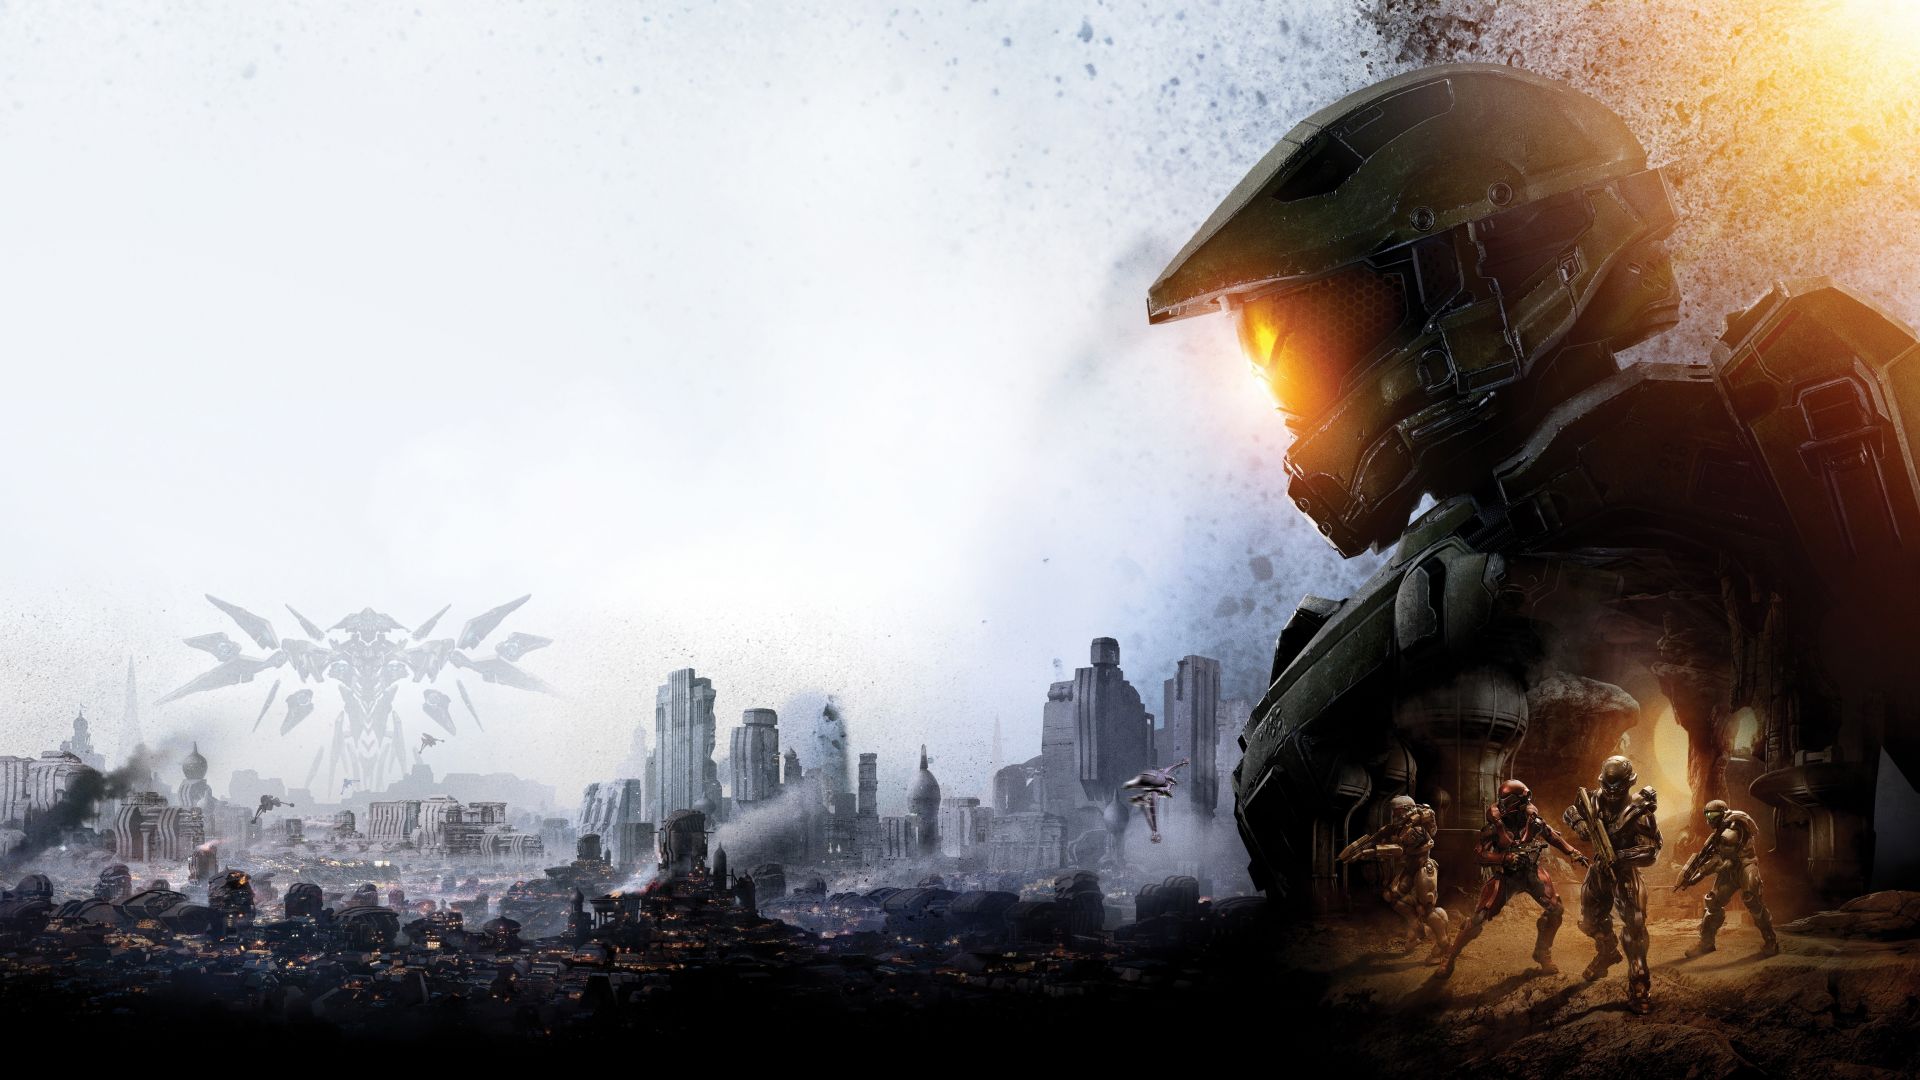 Wallpaper Master chief, halo 5, video game, 5k